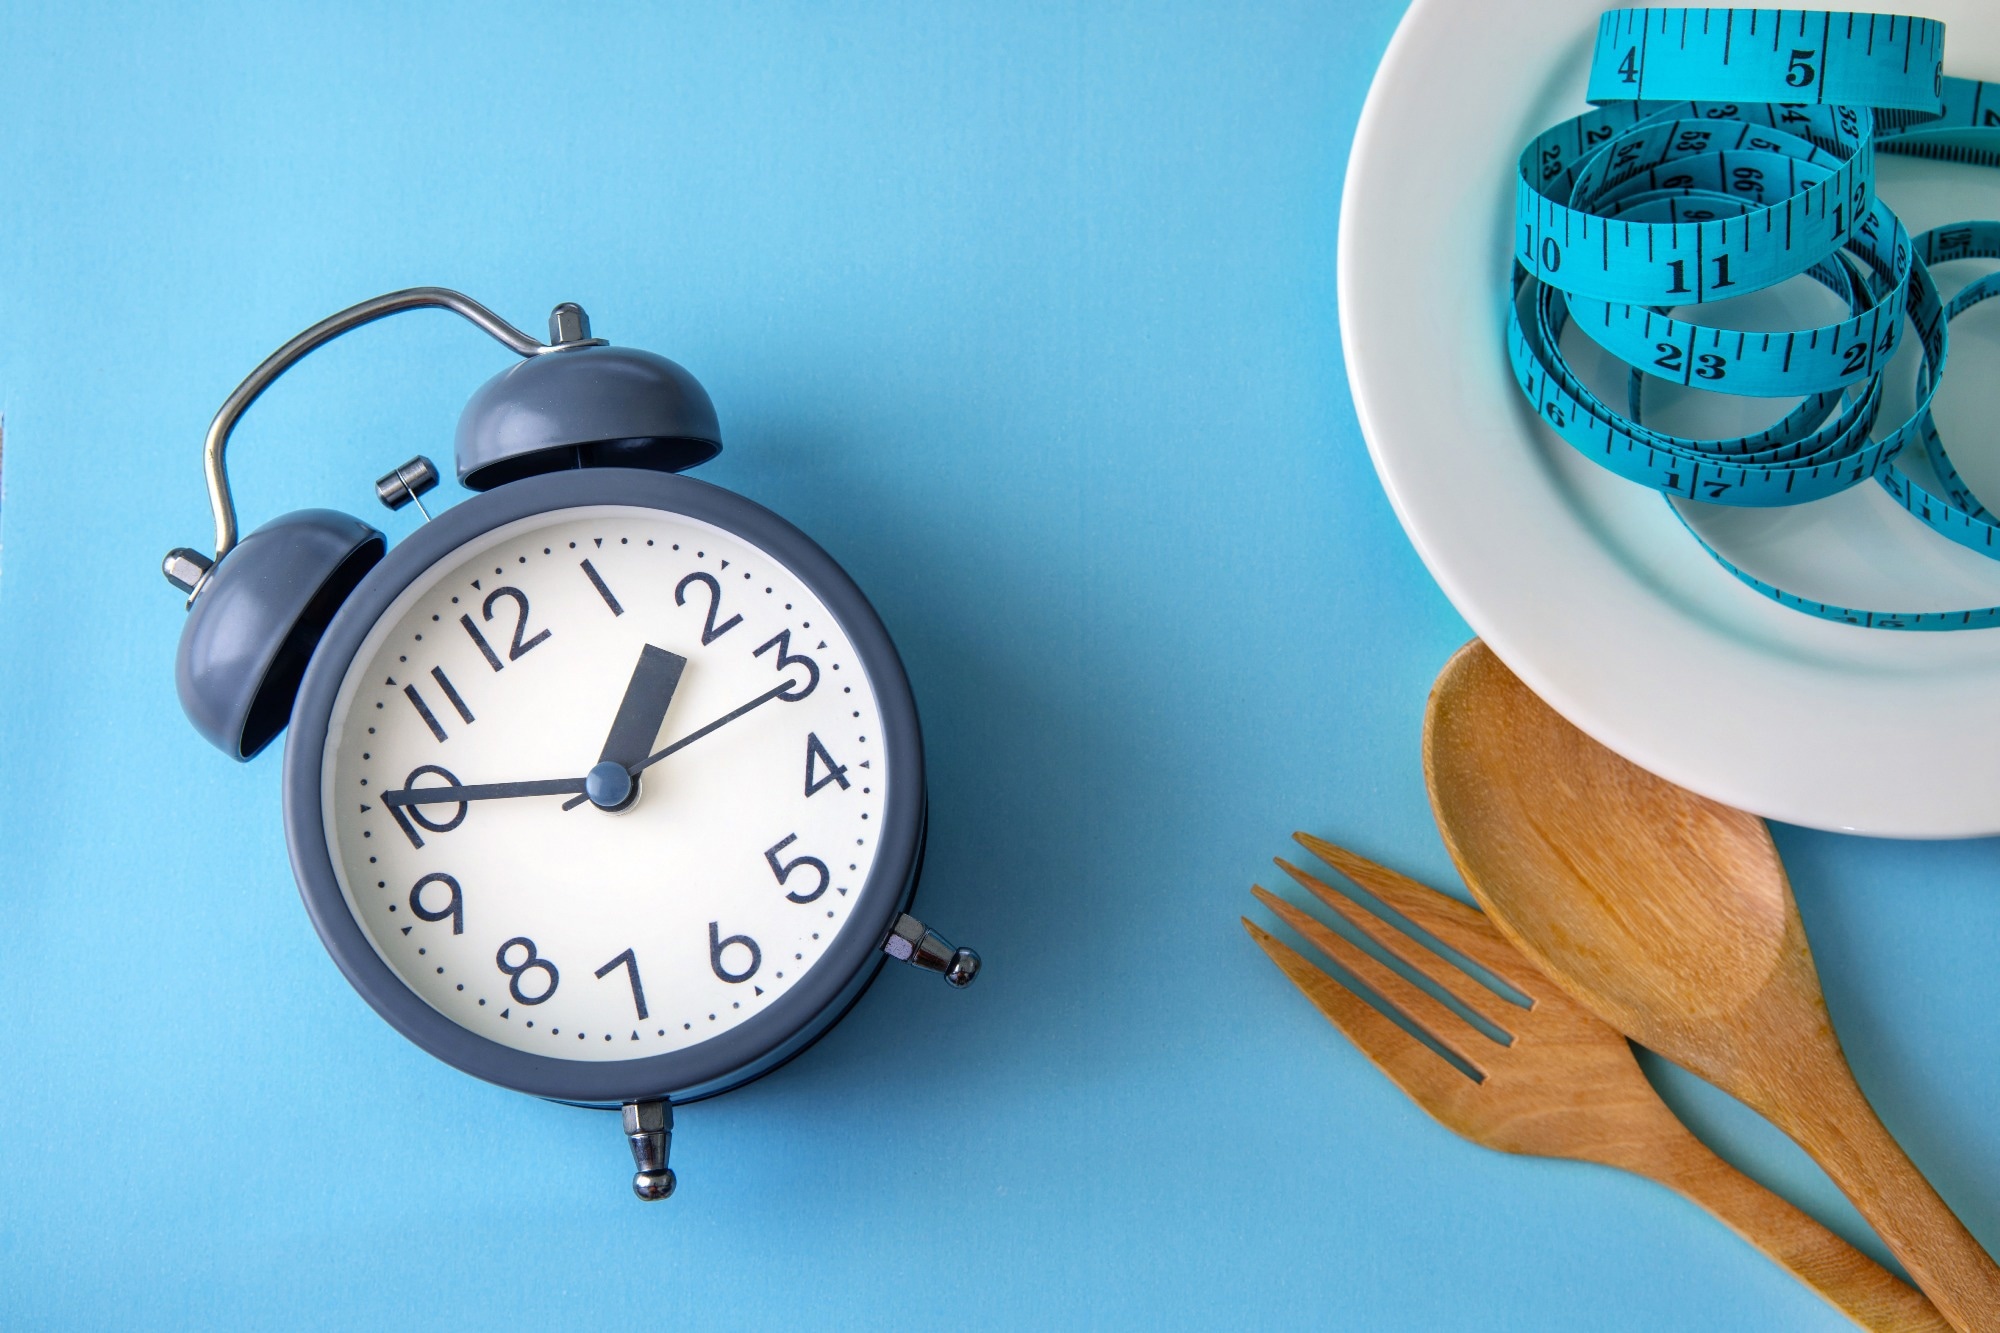 Study: Effect of intermittent fasting on circulating inflammatory markers in obesity: A review of human trials. Image Credit: Cozine / Shutterstock